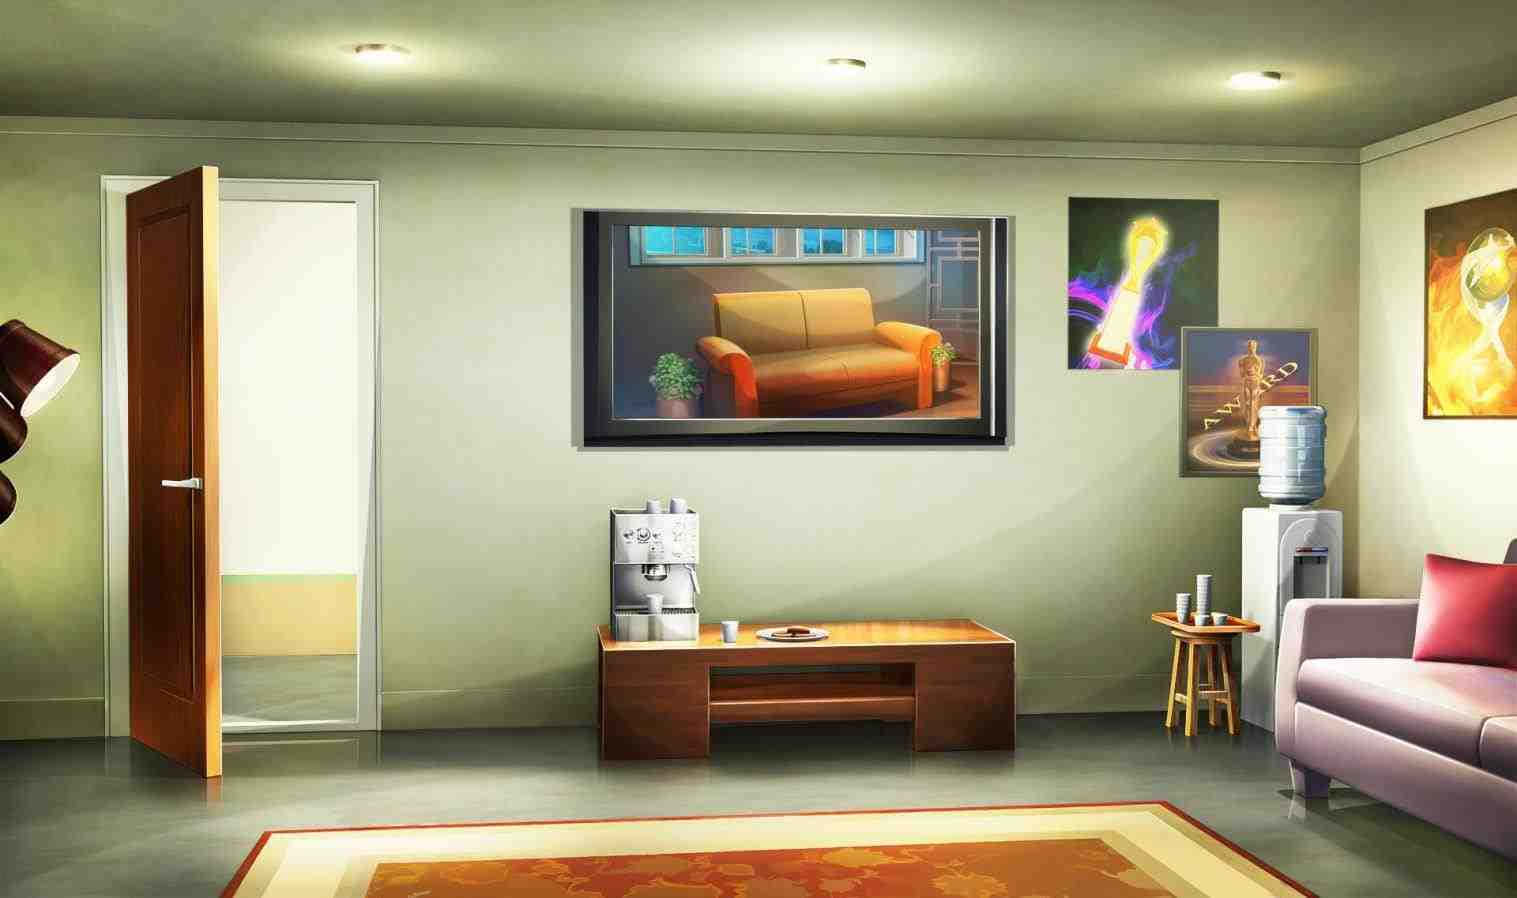 Curl up with a good show in this cozy anime living room